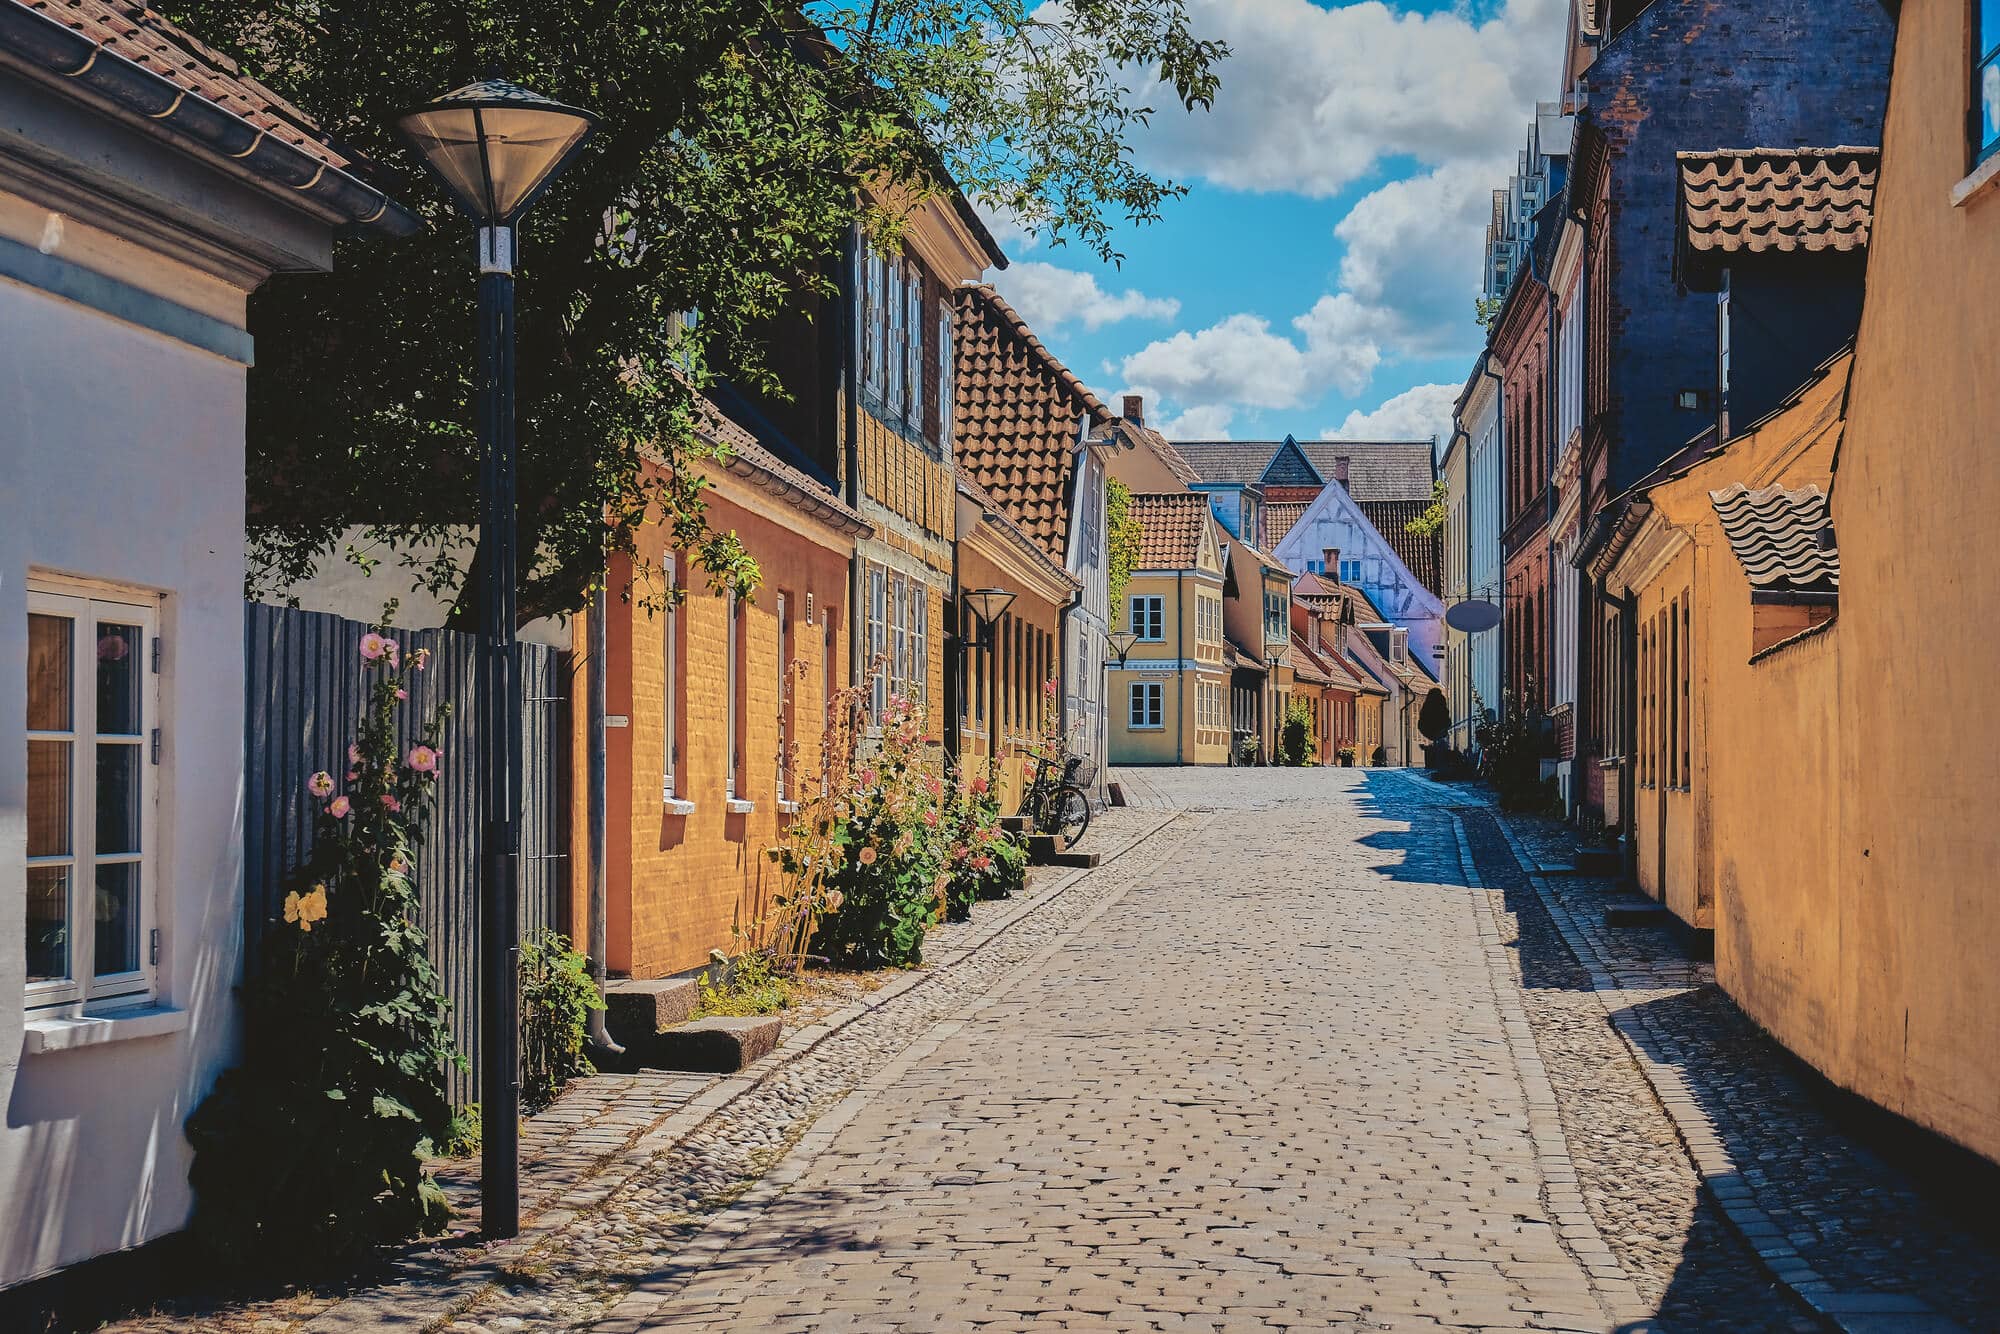 A cobbled street in Odense, lined by yellow brick houses, on a day trip from Aarhus.